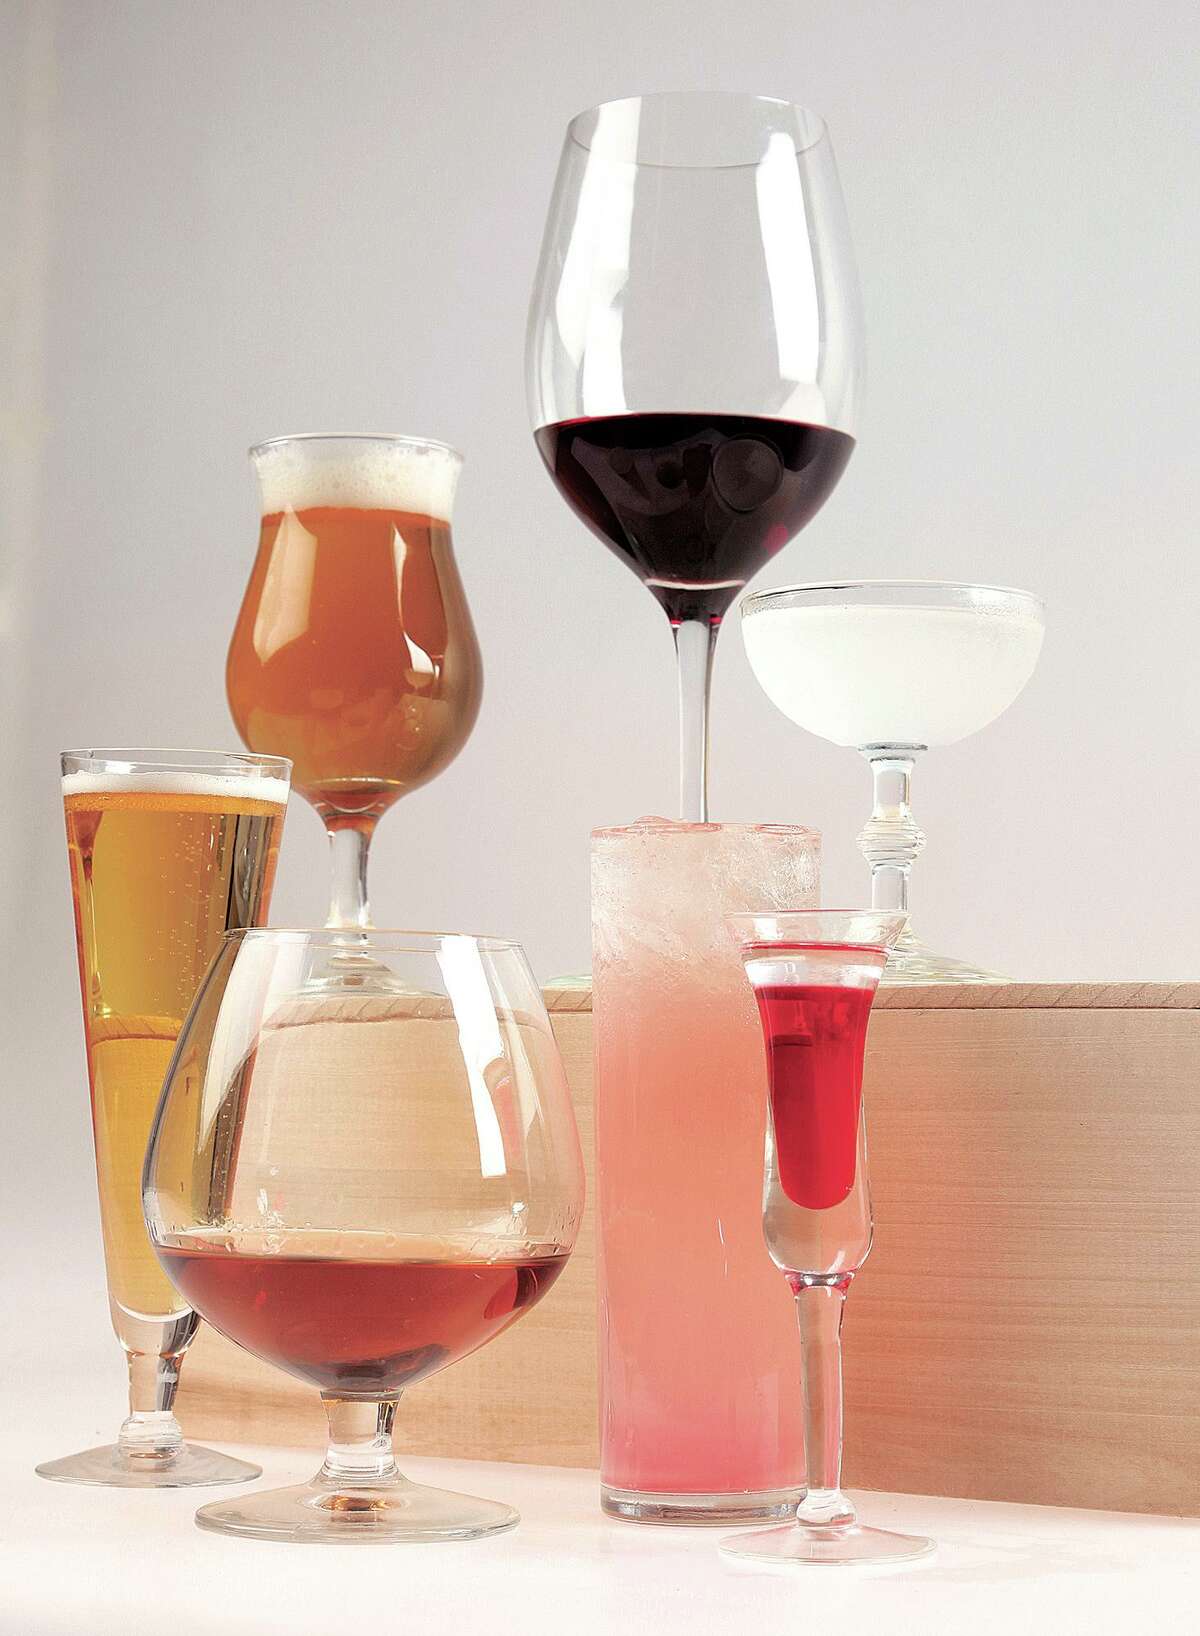 A single serving of wine is defined as 5 ounces. A serving of beer is 12 ounces. And for liquor, a serving is 1½ ounces.